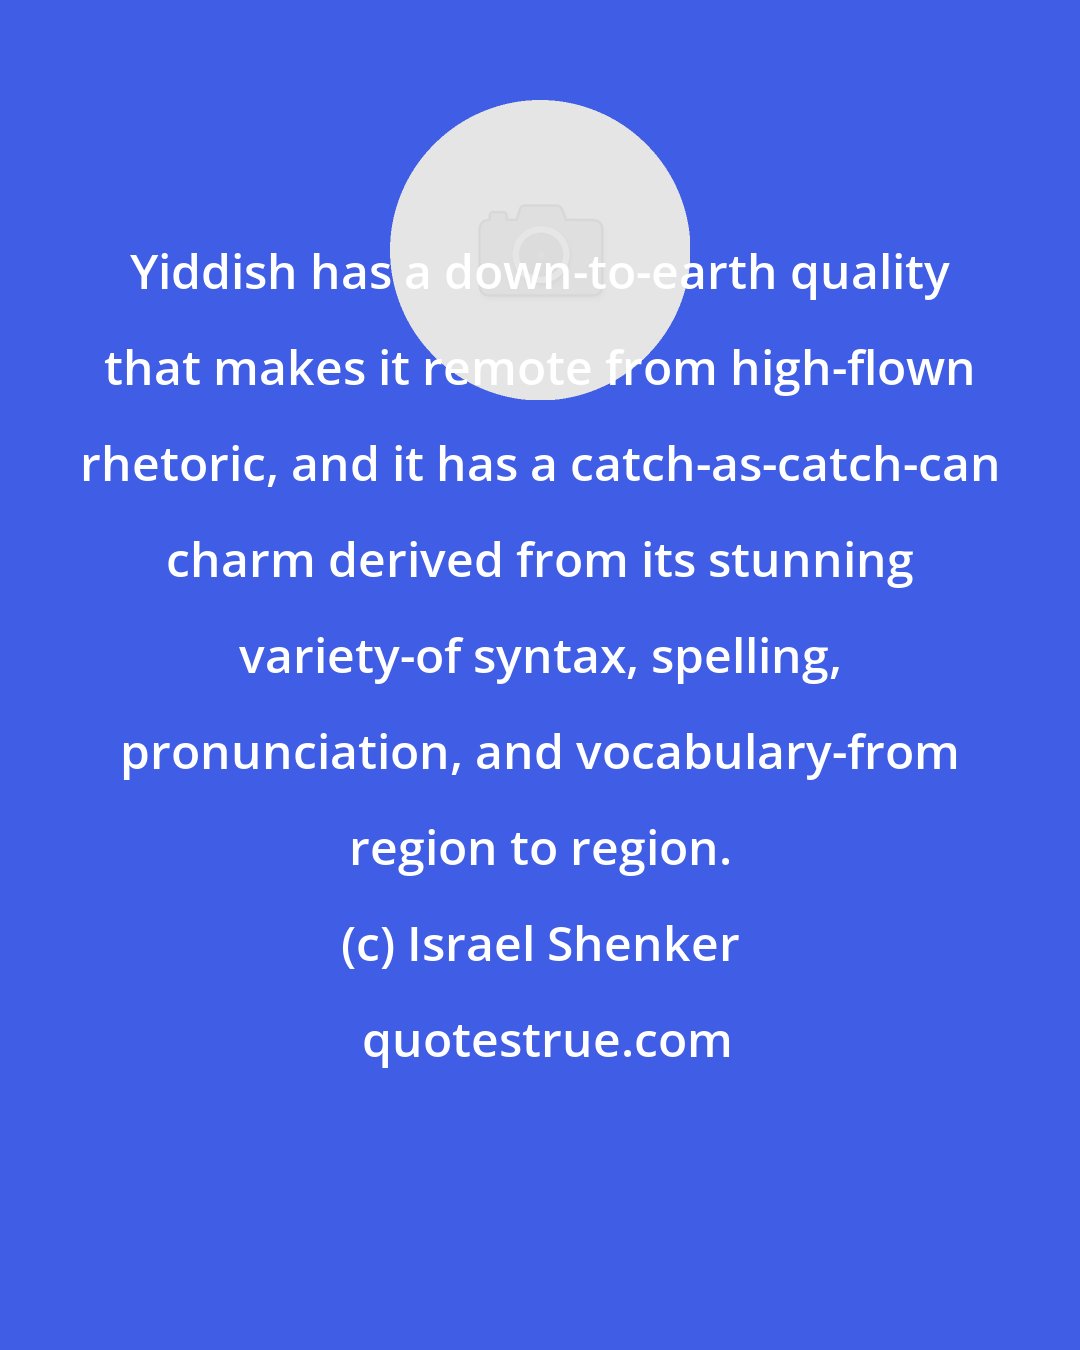 Israel Shenker: Yiddish has a down-to-earth quality that makes it remote from high-flown rhetoric, and it has a catch-as-catch-can charm derived from its stunning variety-of syntax, spelling, pronunciation, and vocabulary-from region to region.